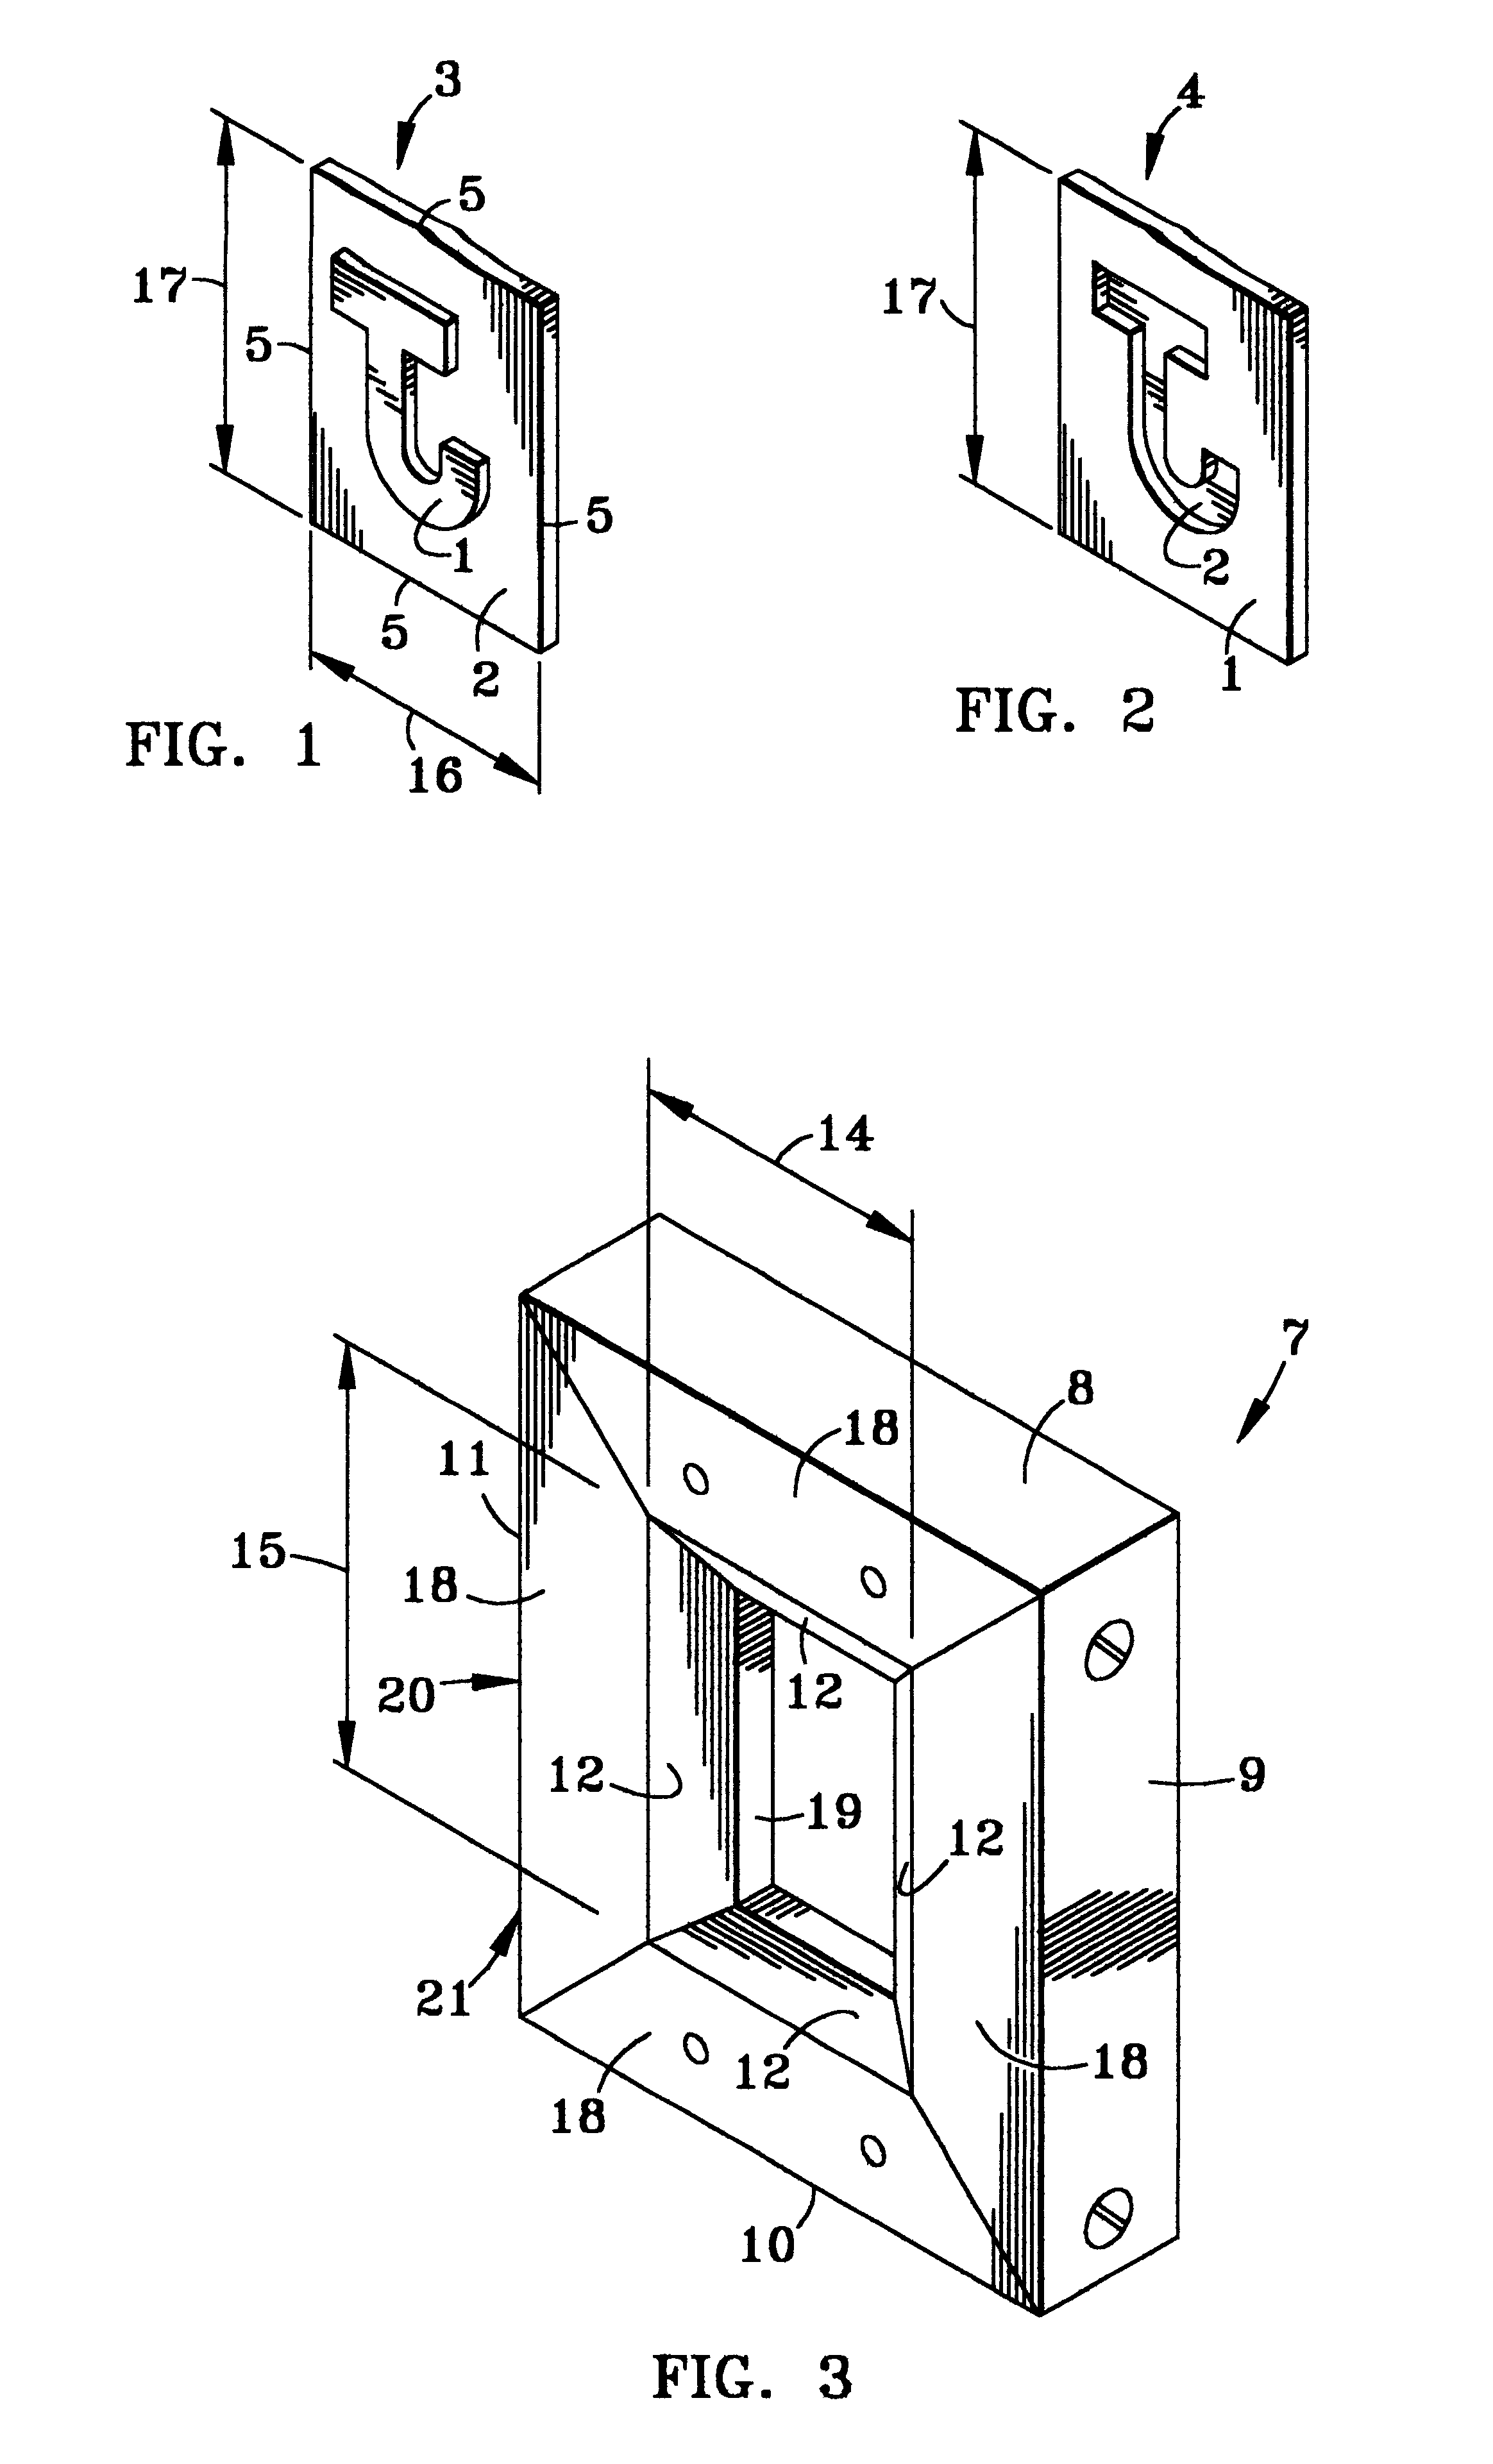 Method for producing candles having three dimensional surface designs